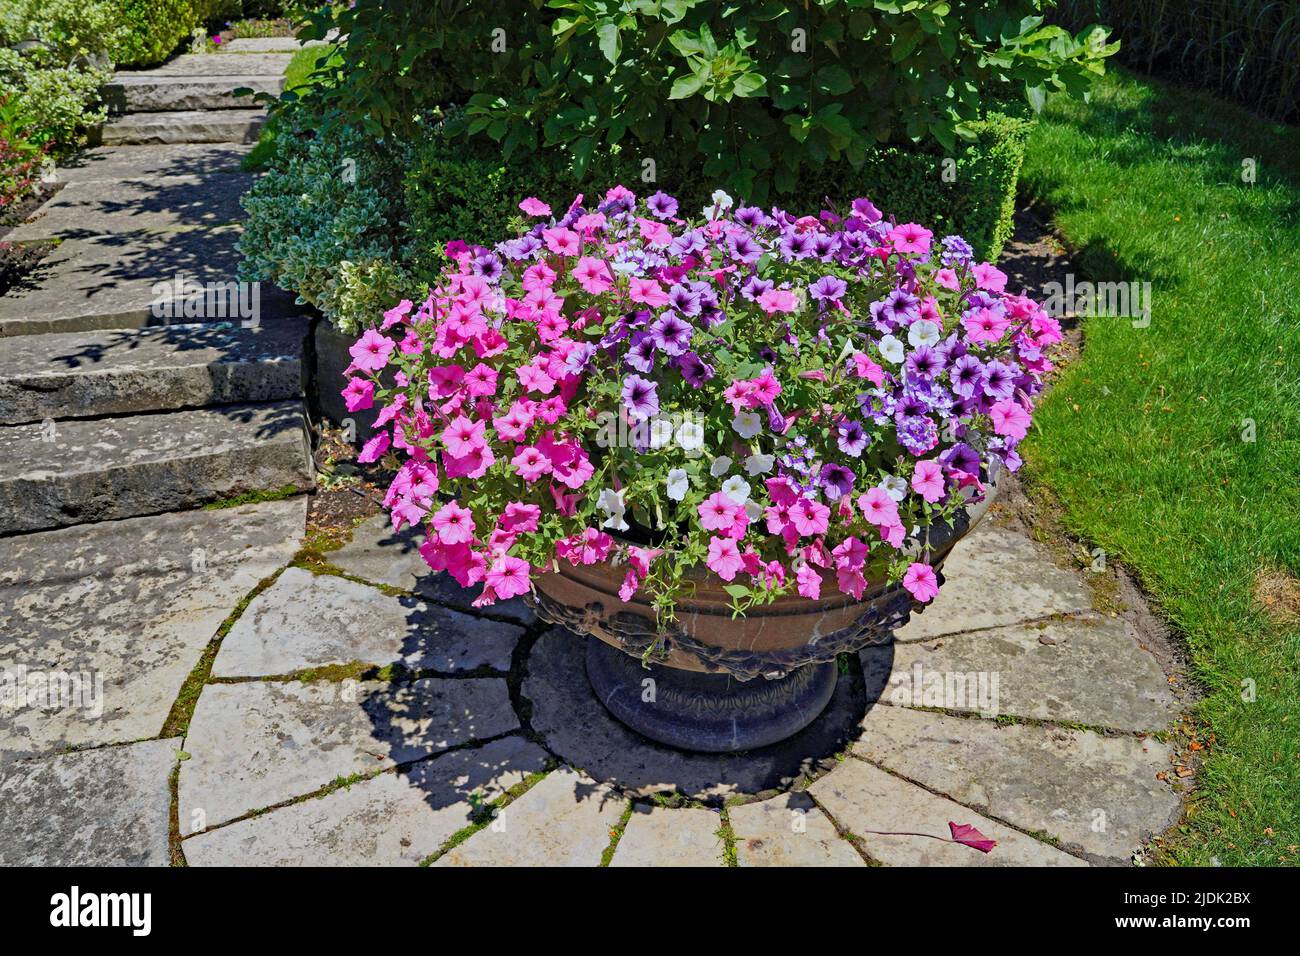 Large flower pot full of petunias, outdoors in a formal garden Stock Photo